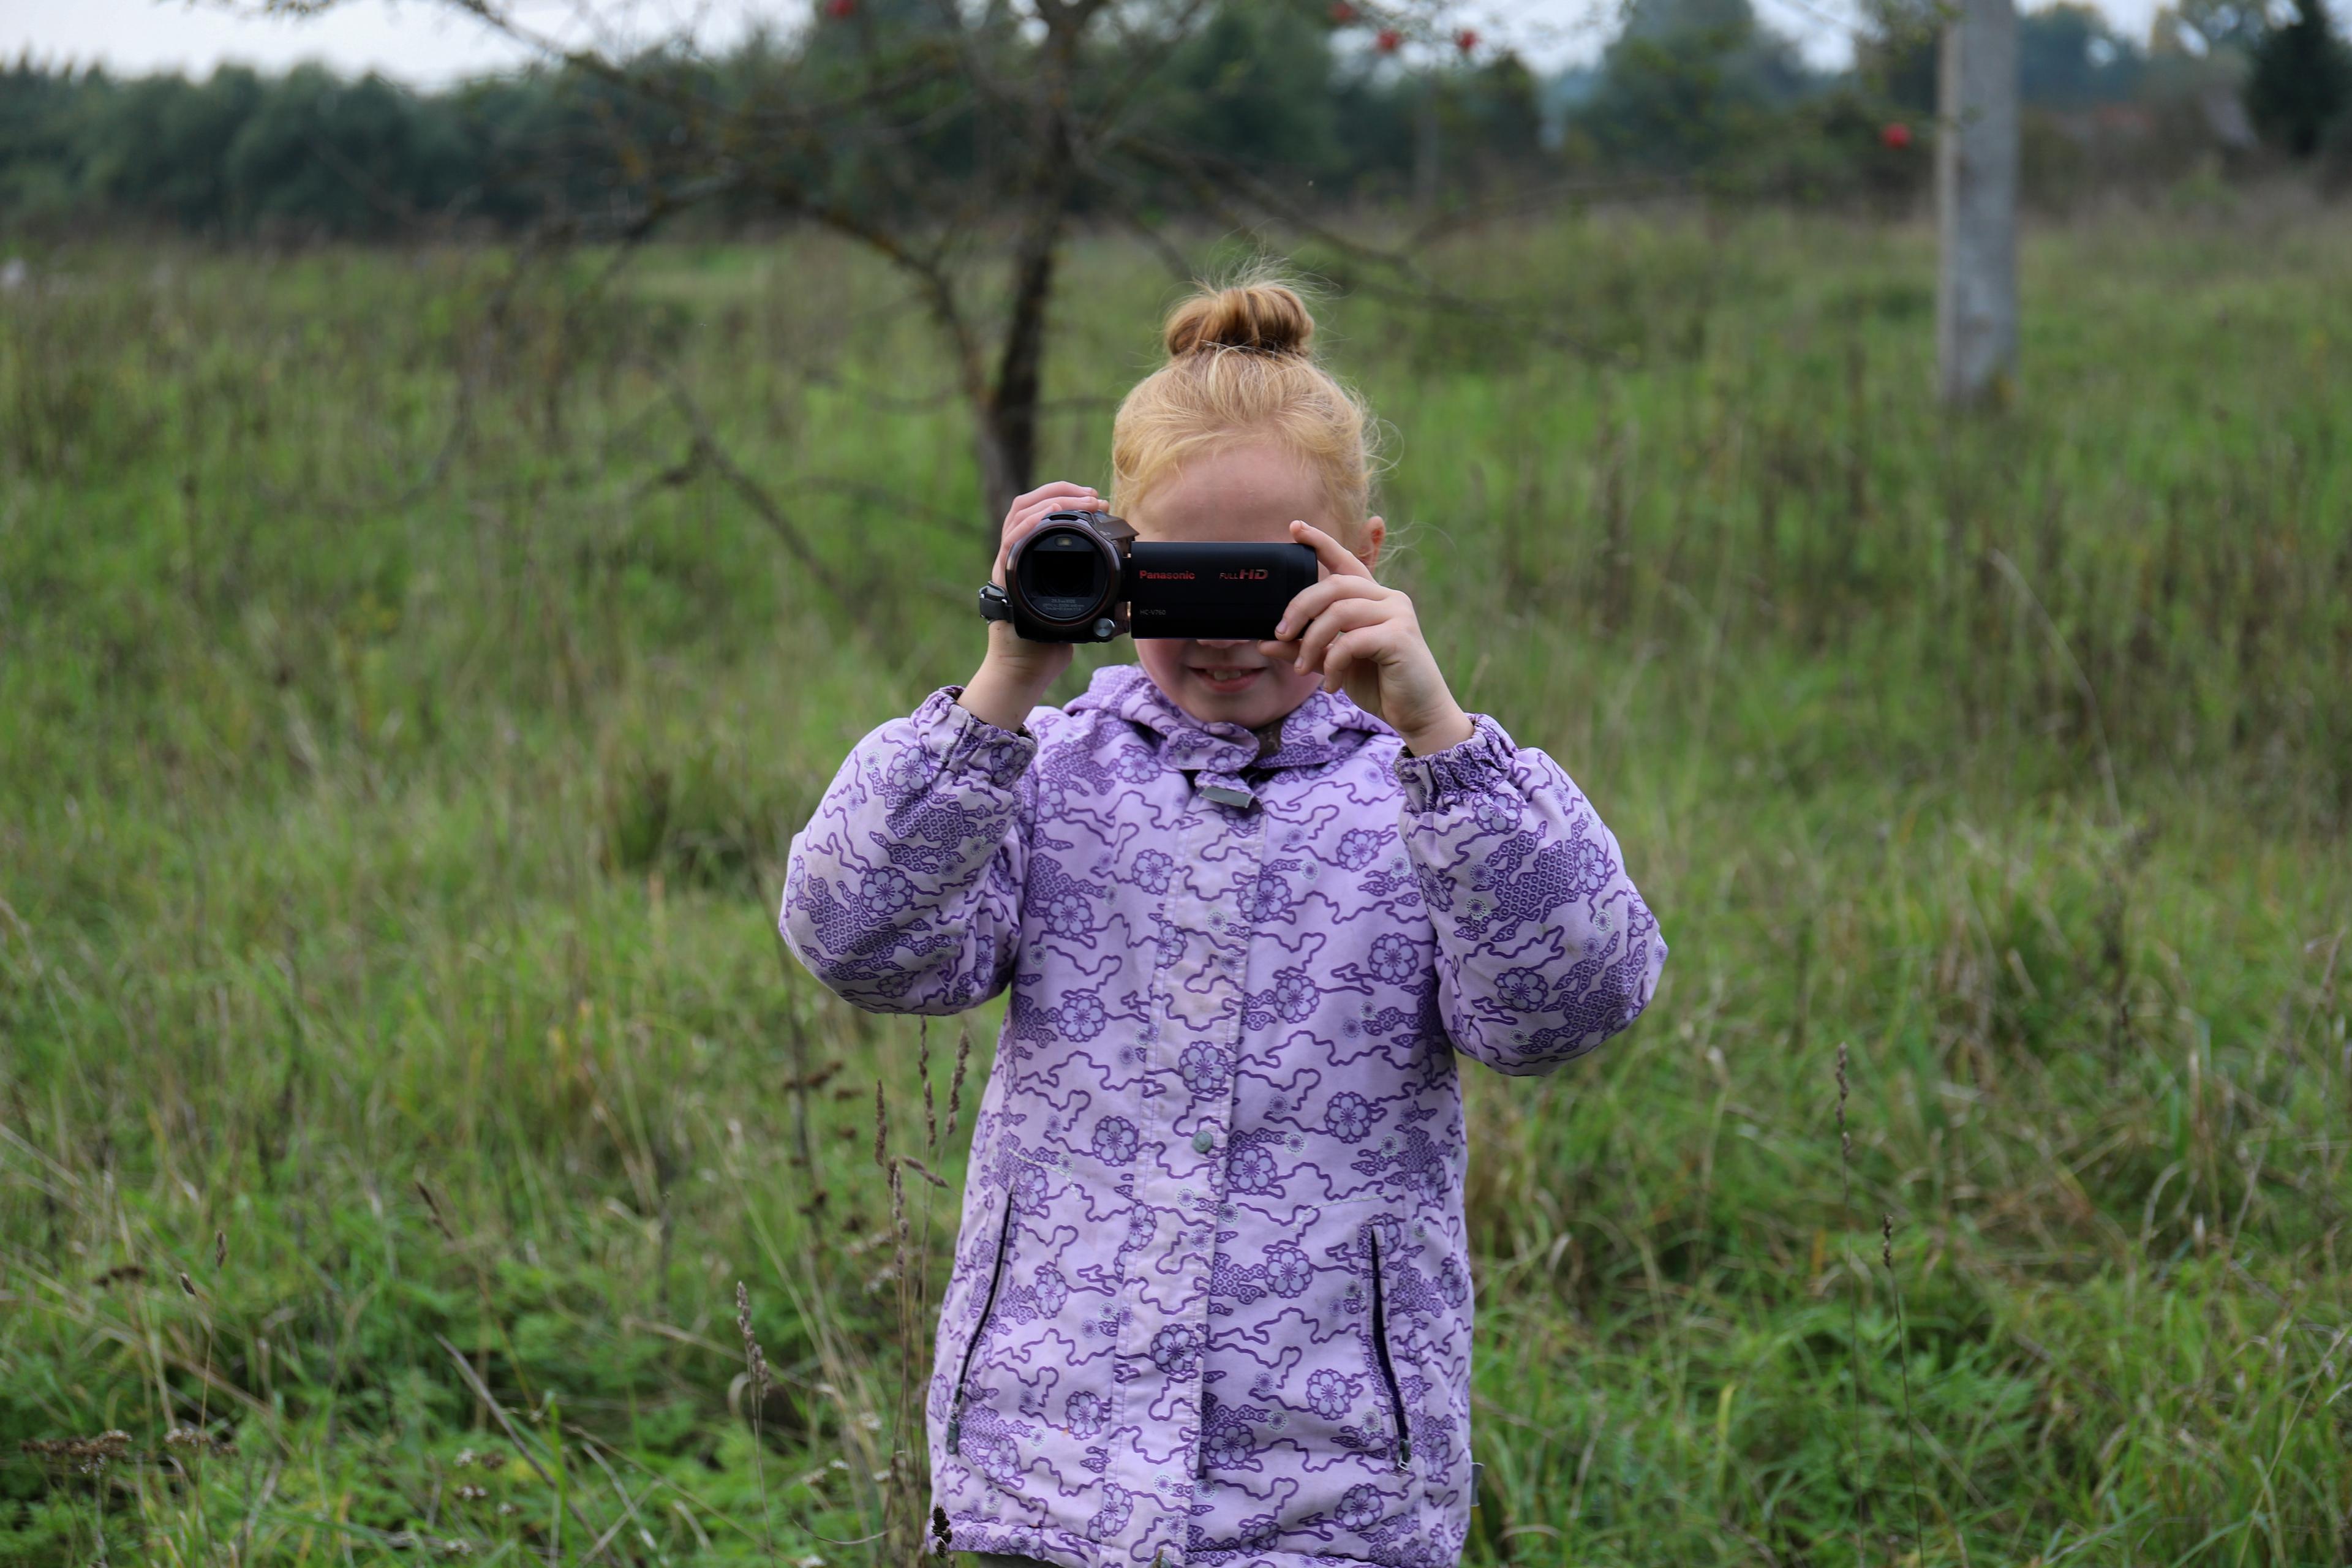 A girl holding a video camera in front of a field. The camera obscures her face.